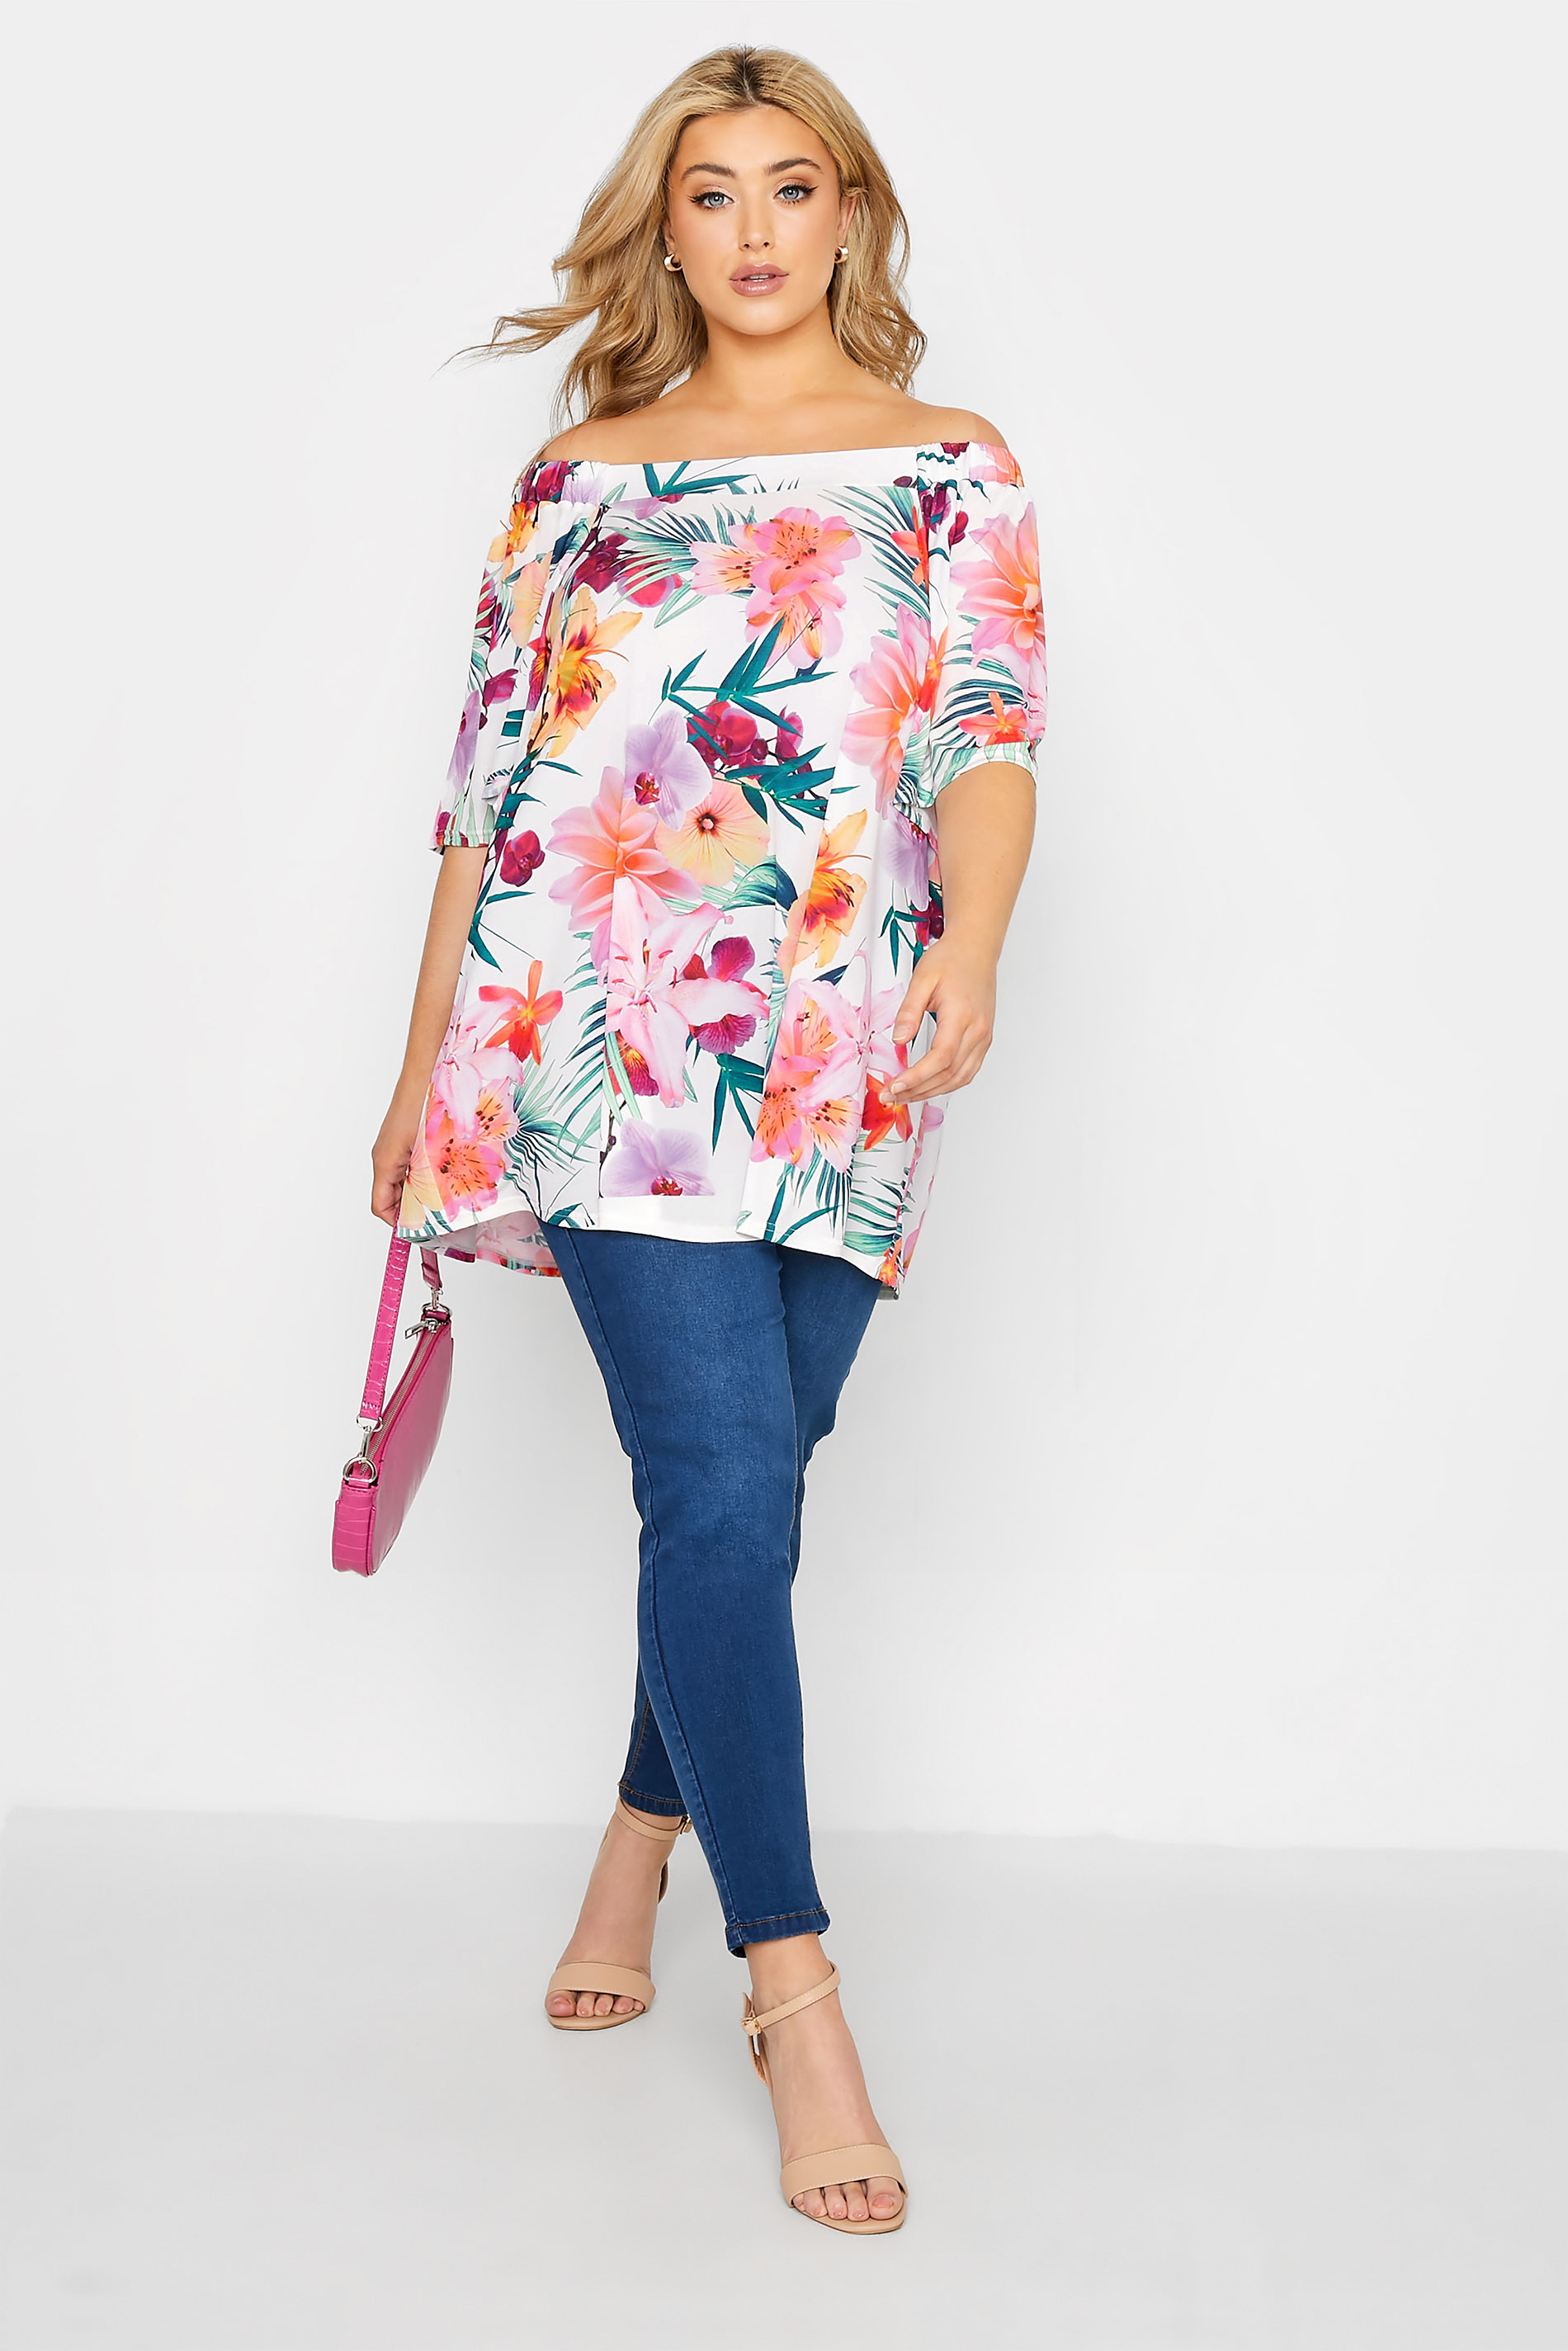 Grande taille  Tops Grande taille  Tops Épaules Ajourées & Style Bardot | YOURS LONDON - Top Floral Tropical Bardot - XN11952